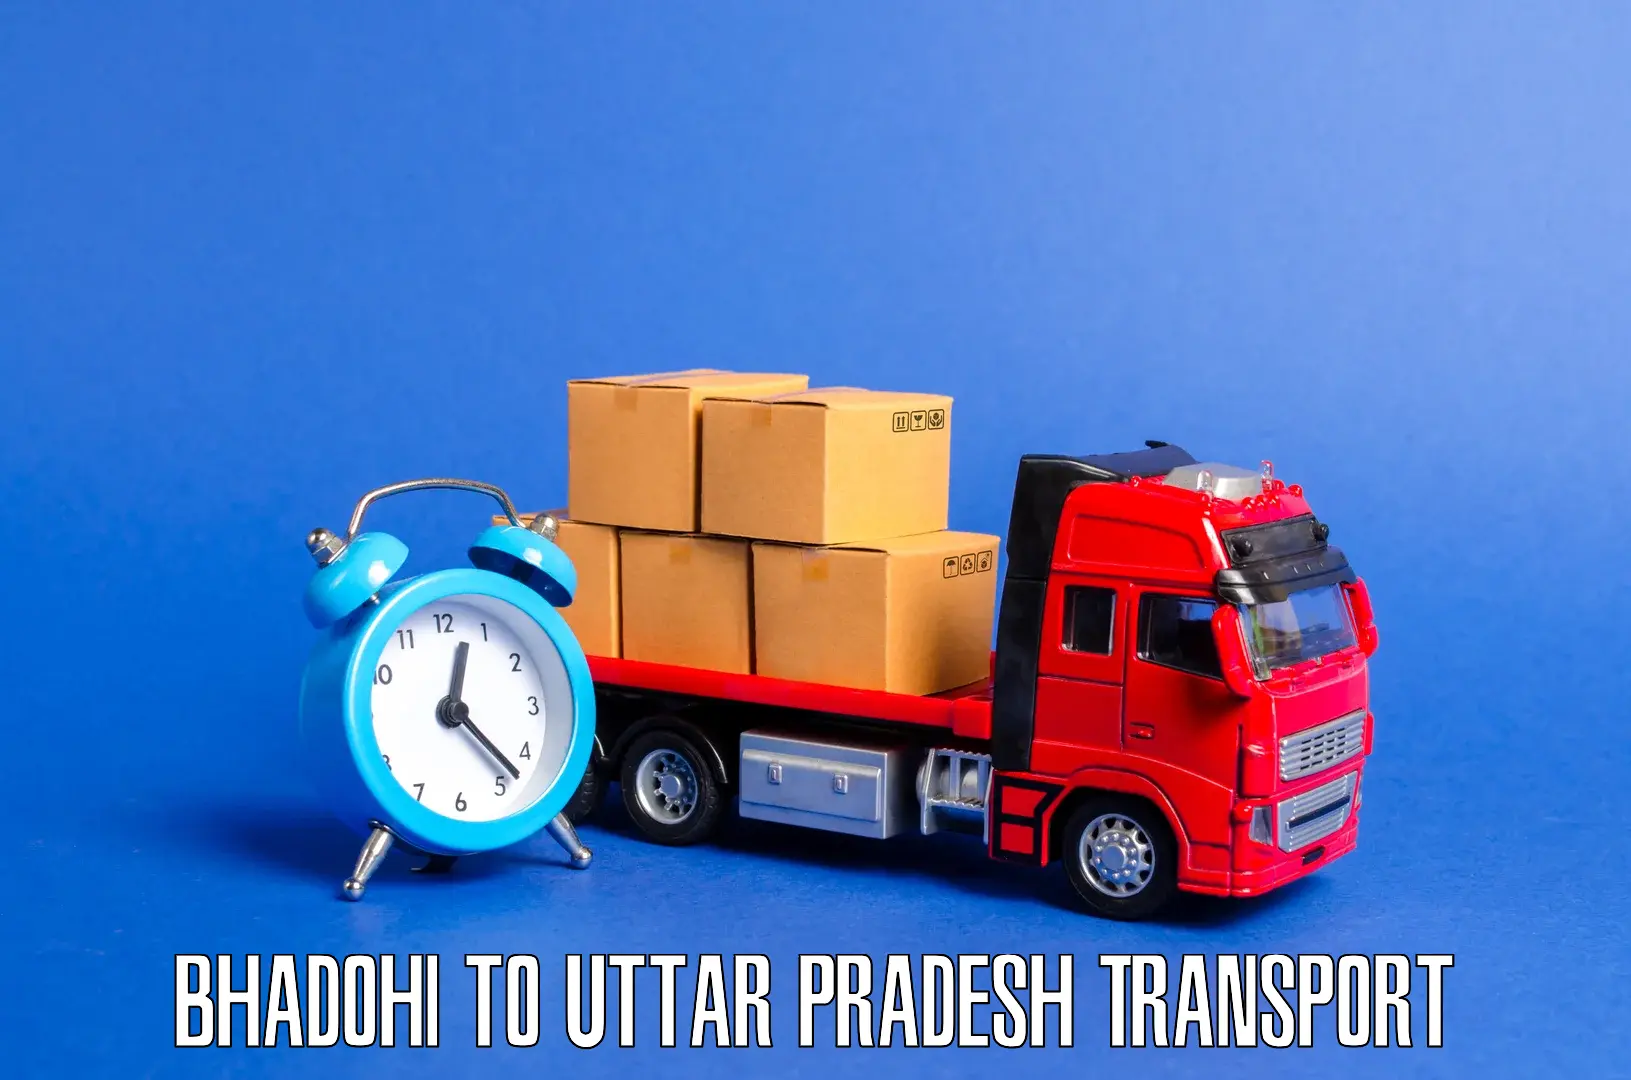 Express transport services in Bhadohi to Bansi